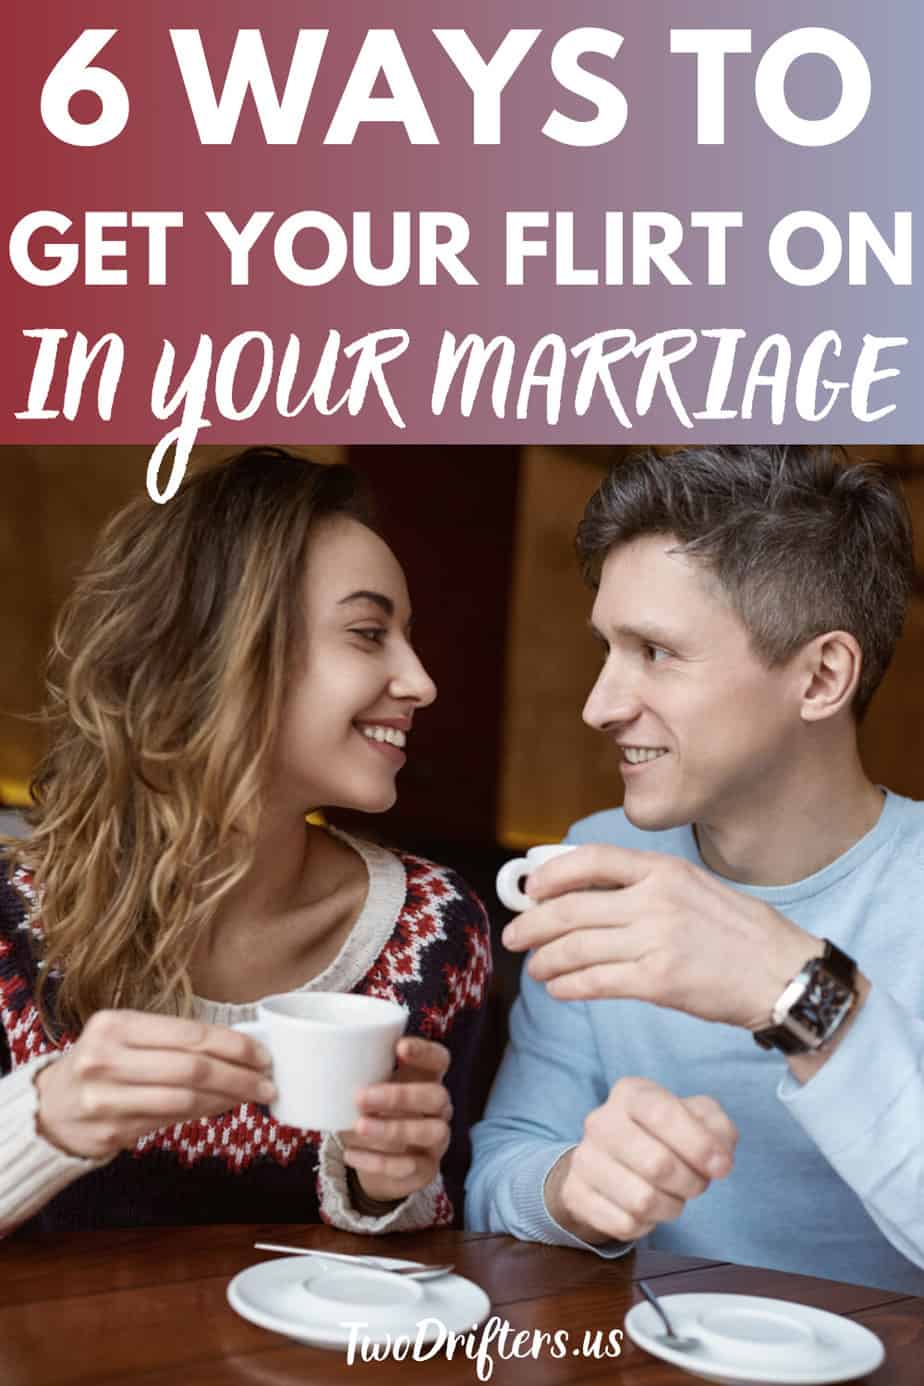 Pinterest social share image that says "6 Ways to Get Your Flirt on in Your Marriage."